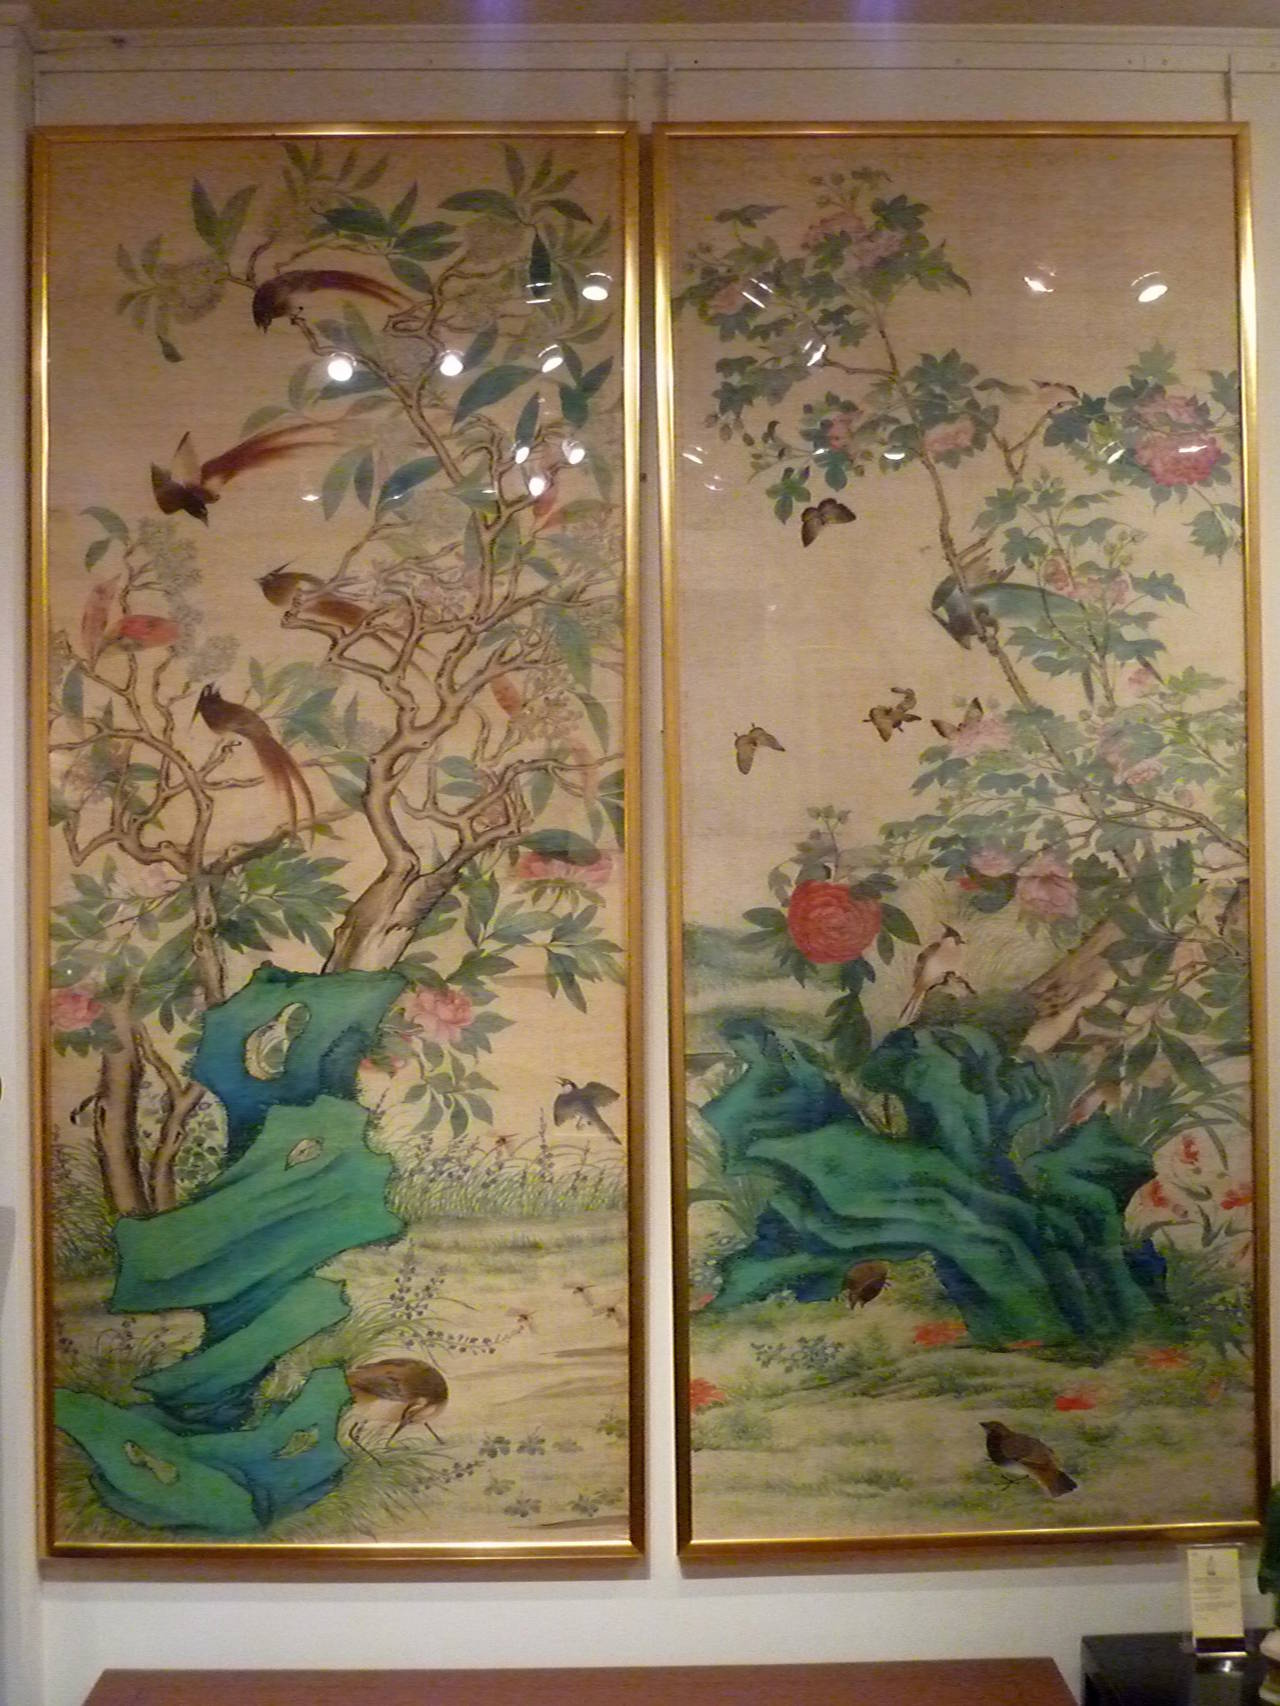 Pair of fine brush painting, Anglo-Chinese school of birds and flowers, 19th century, ink and color on silk, conservation framed. Acquired from Christie's Amsterdam, early 2000